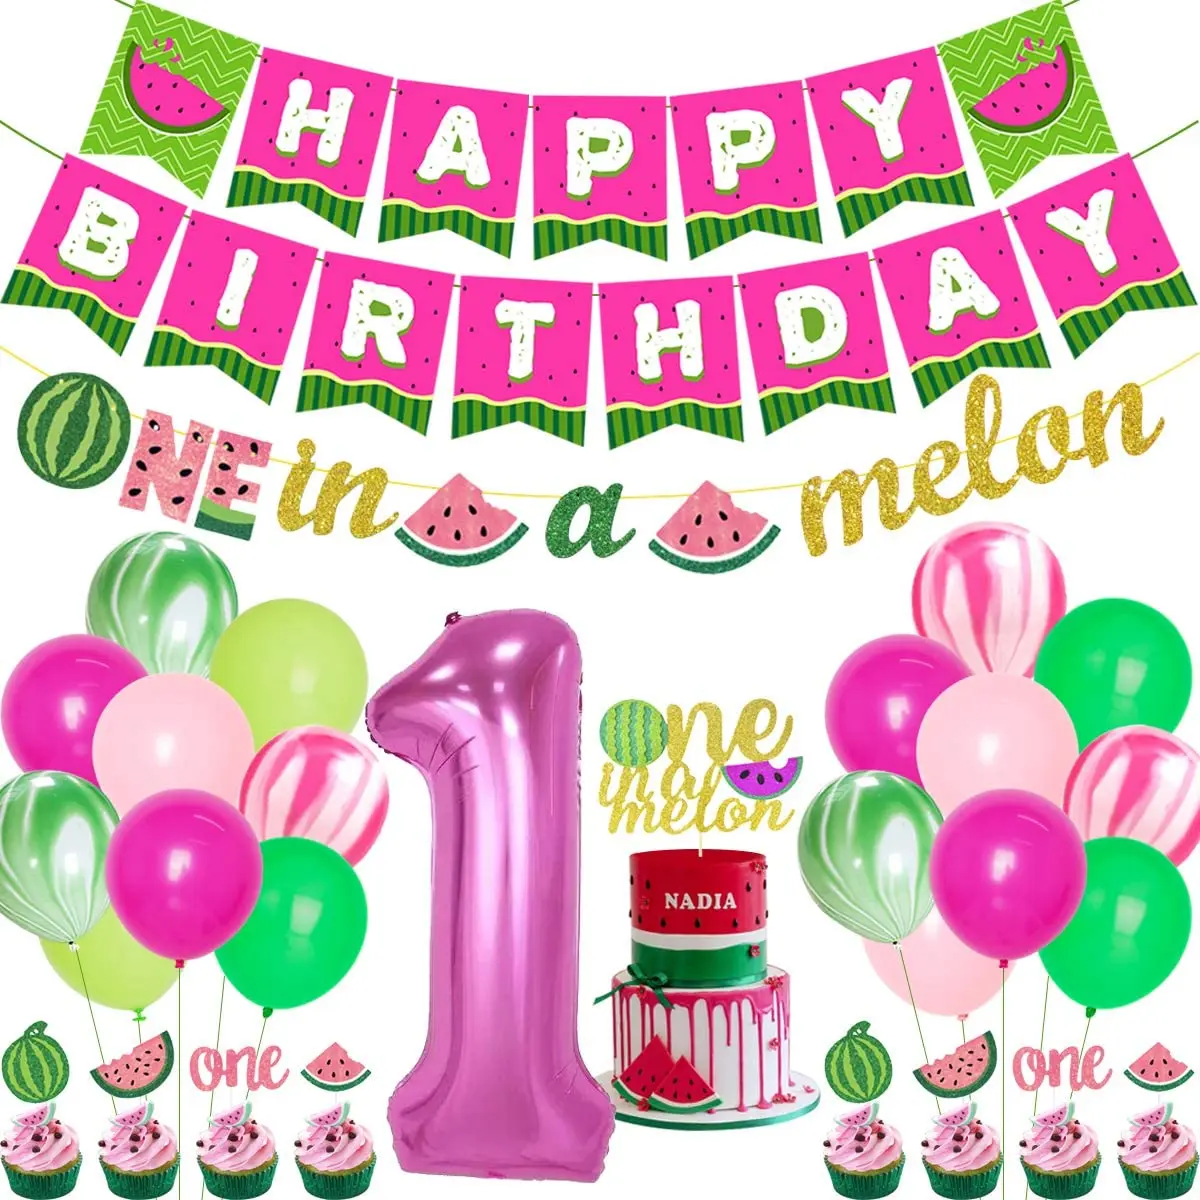 

One In A Melon Watermelon 1st Birthday Decorations for Girl Watermelon Balloons Happy Birthday Banner One In A Melon Cake Topper